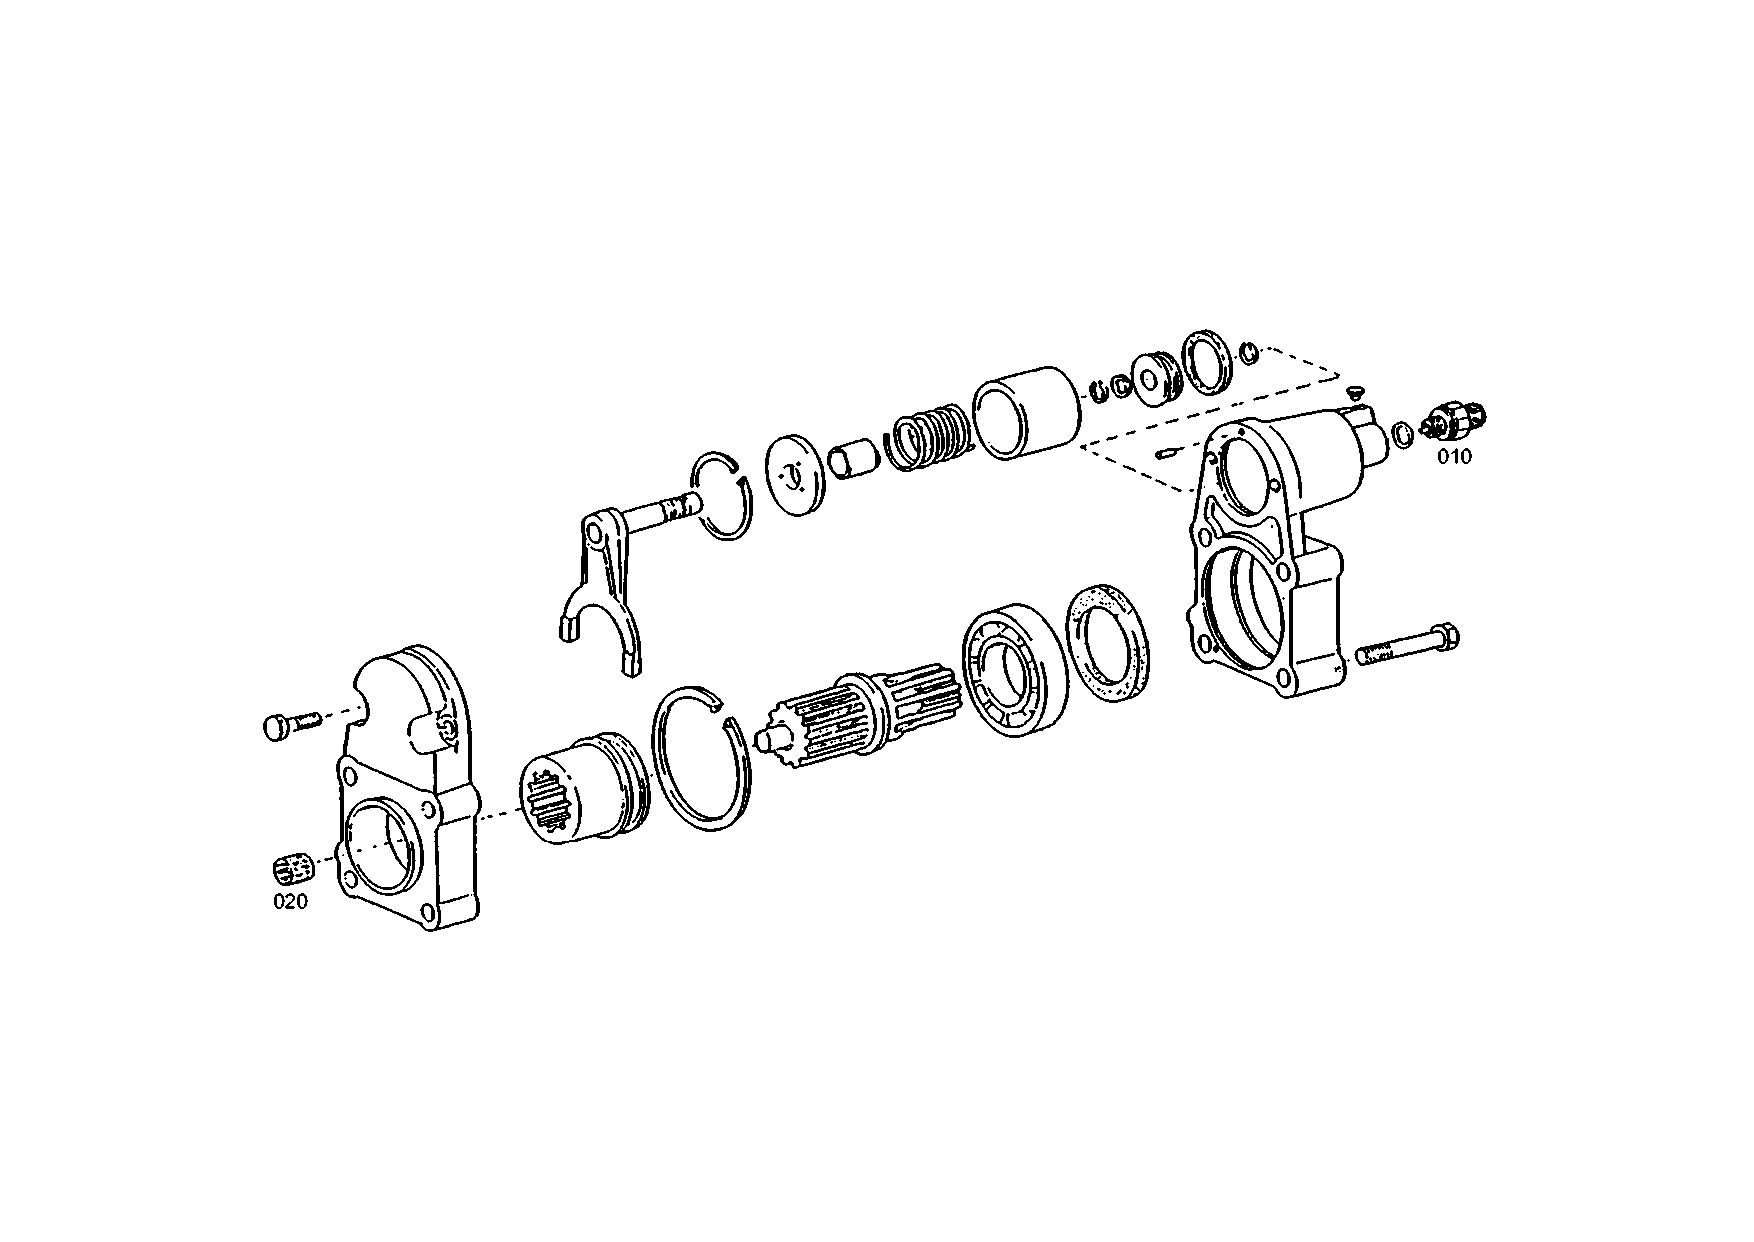 drawing for RABA 171200710001 - PRESSURE SWITCH (figure 1)